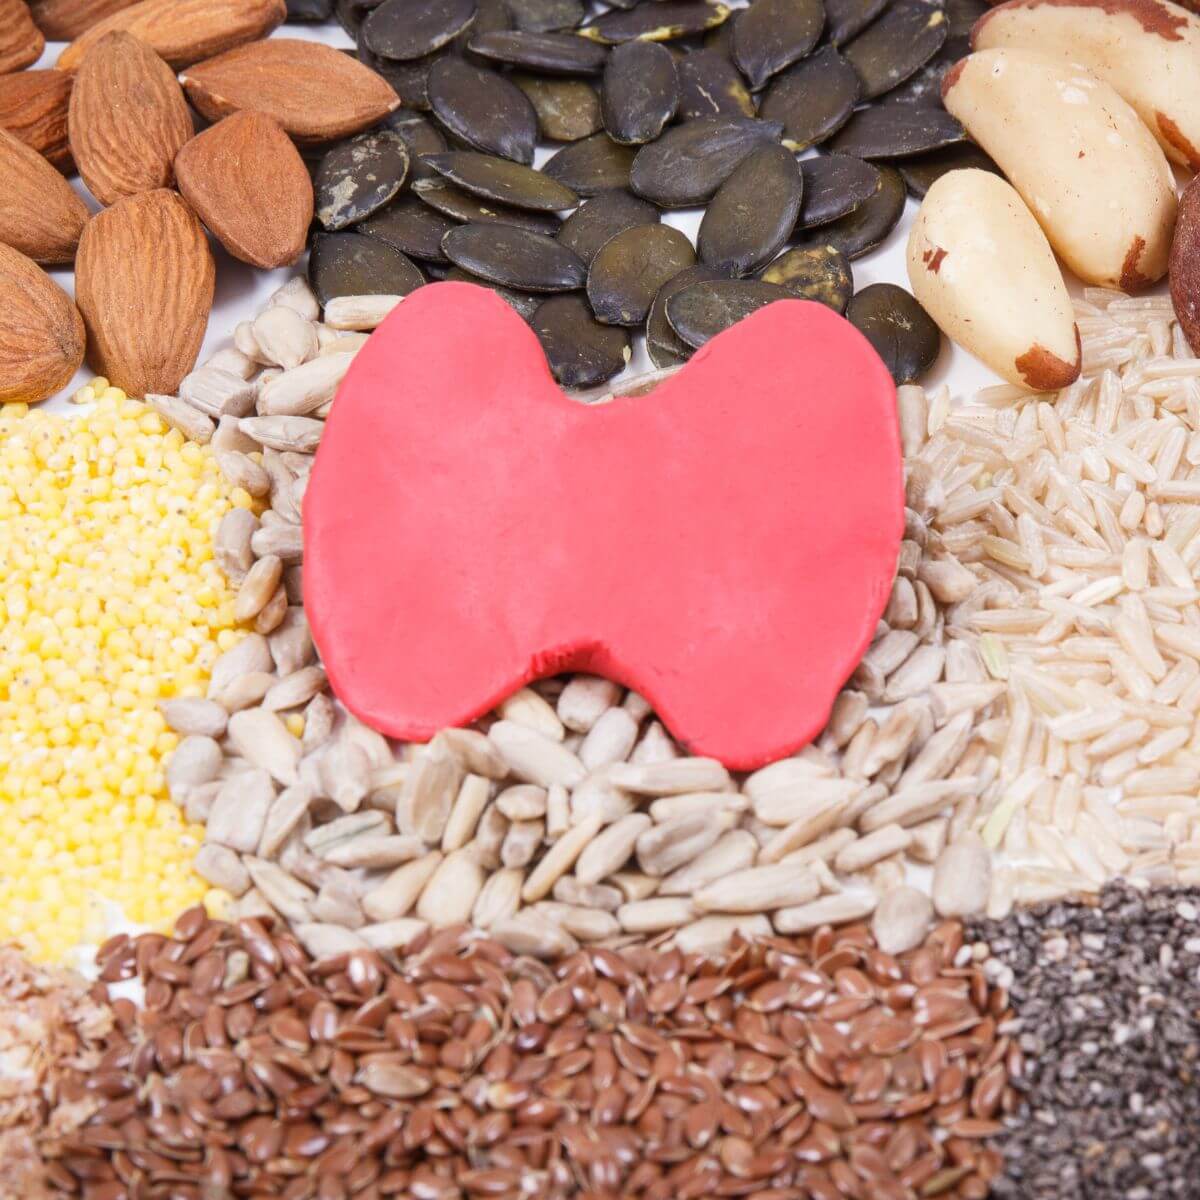 foods for thyroid function, like Brazil nuts and seeds.